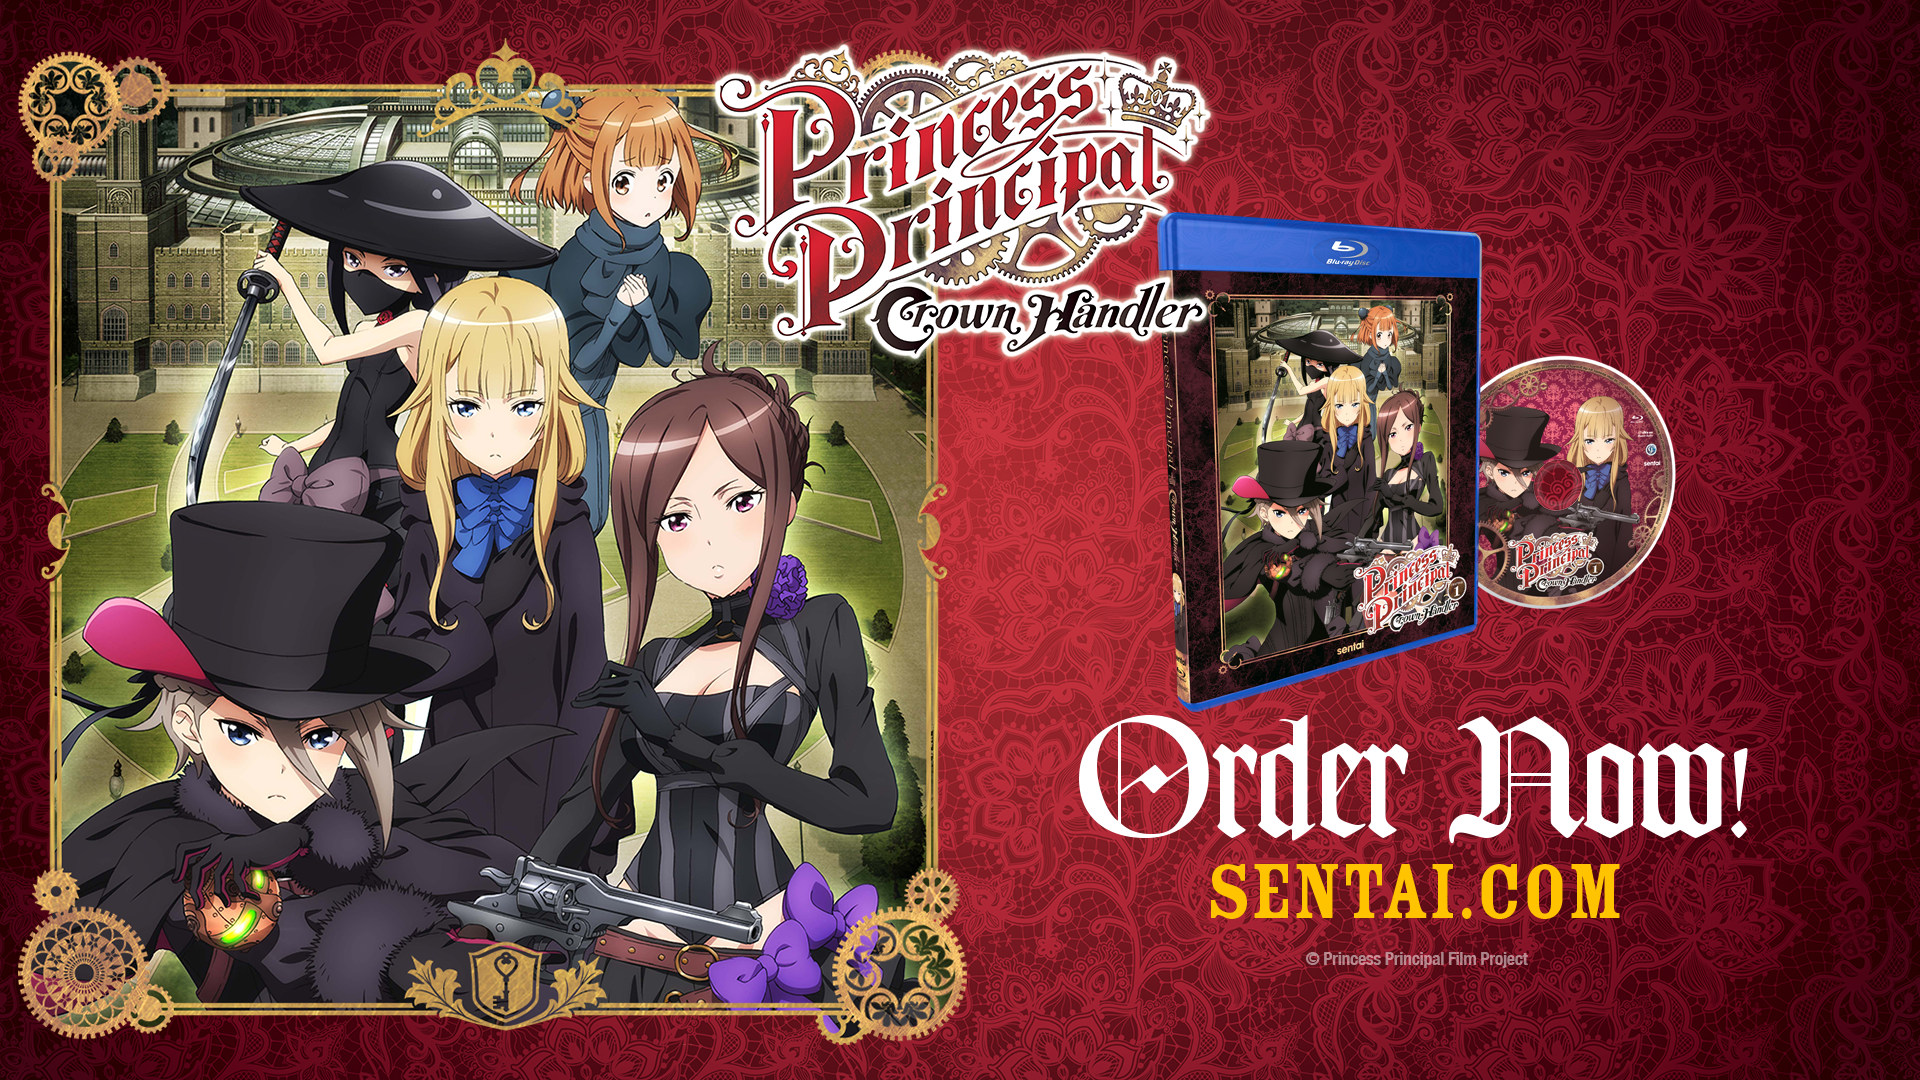 The logo and main cast of the Princess Principal Crown Handler movie and the Blu-ray packaging. The text says, "Order Now! Sentai.com"